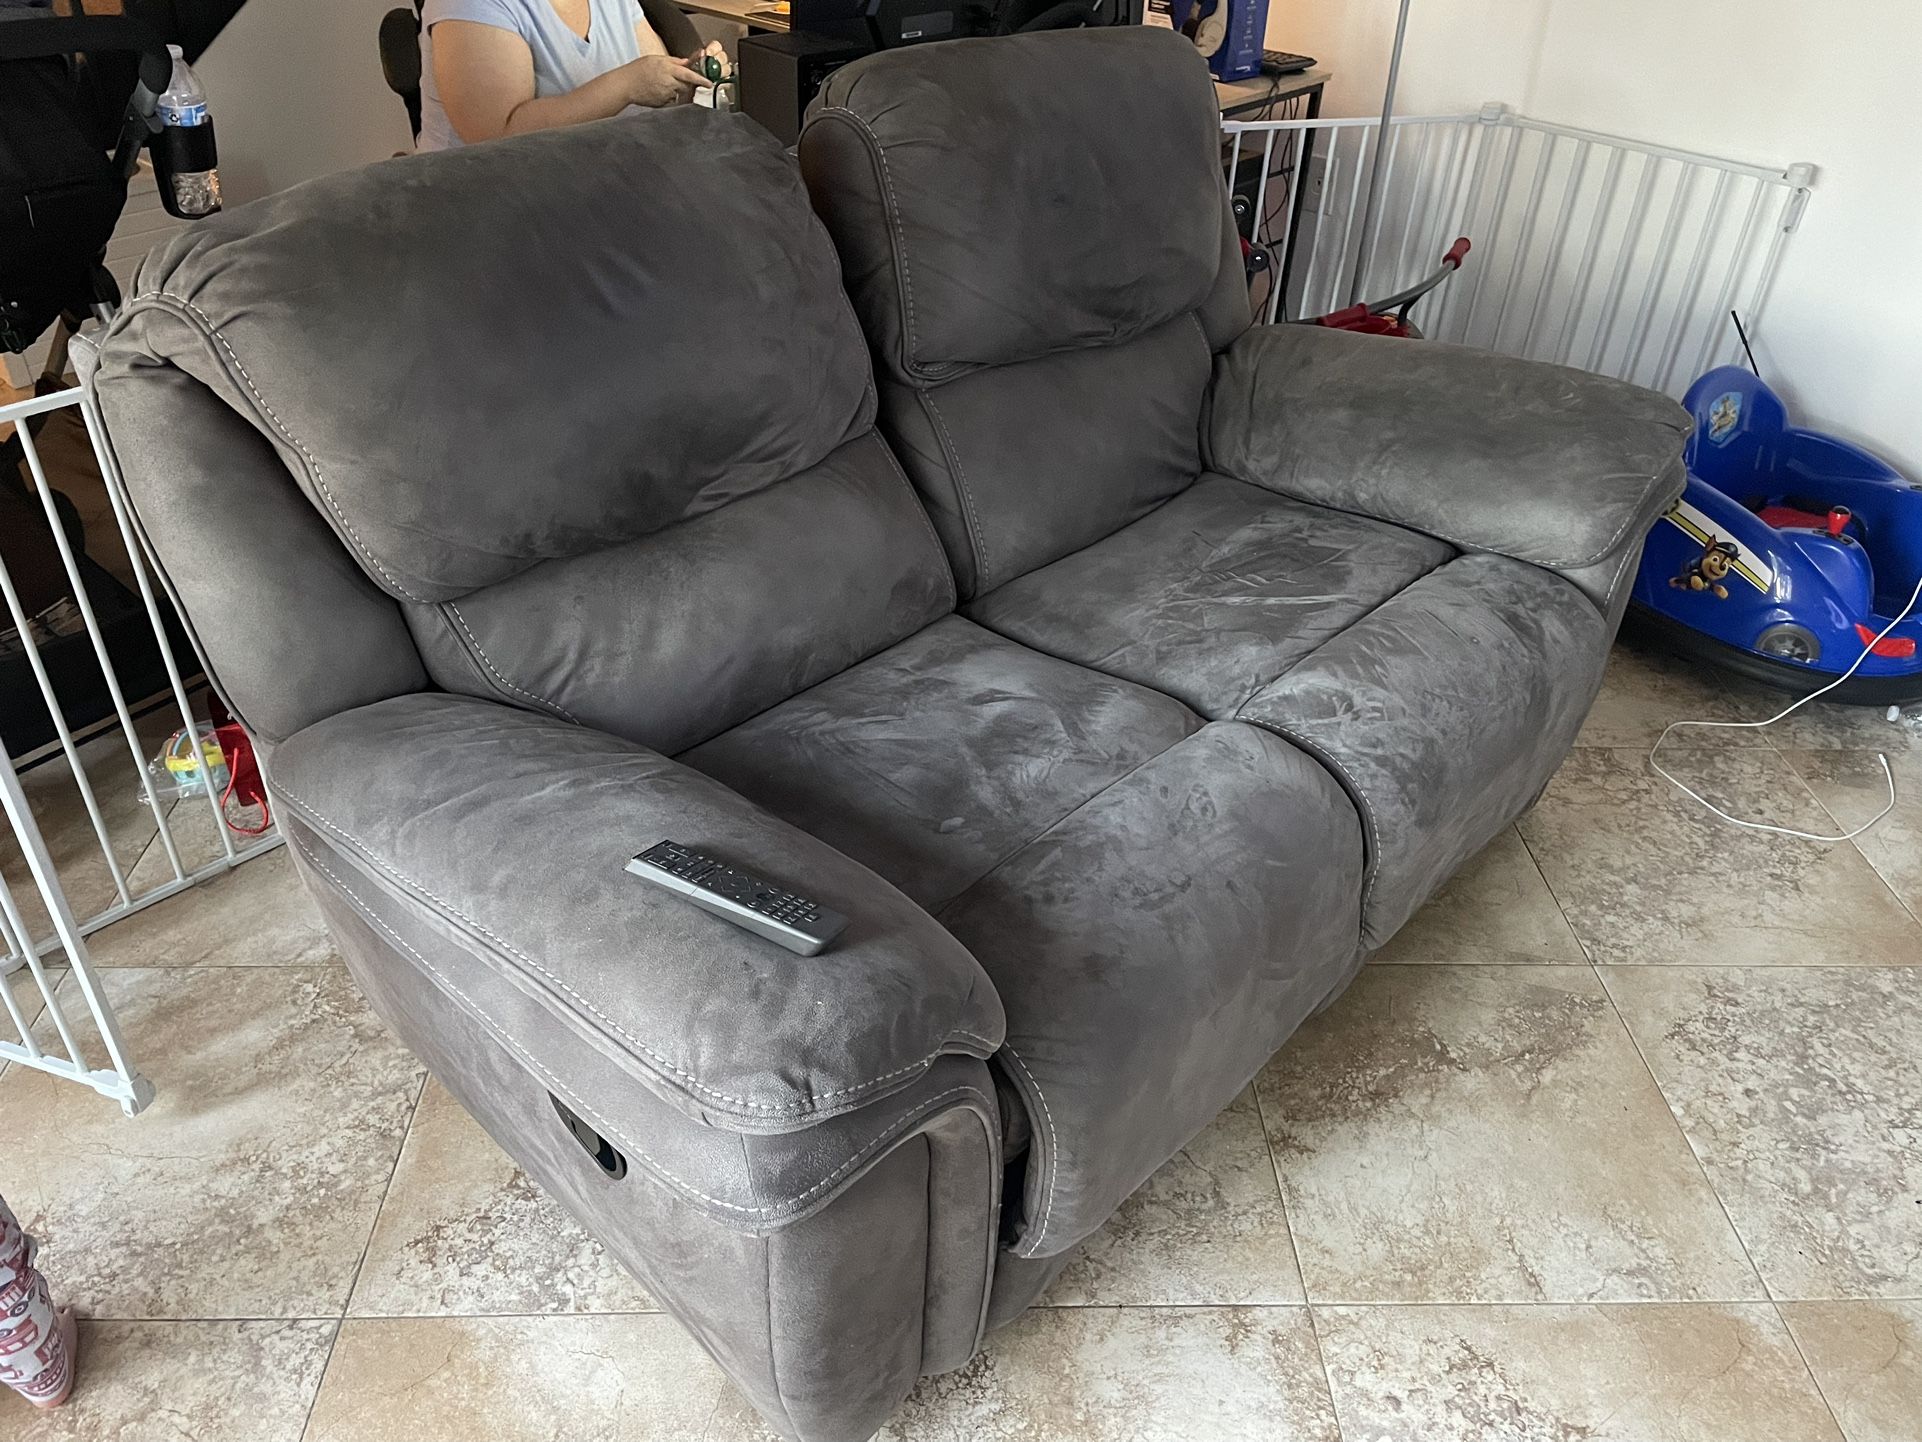 FREE COUCH LOVE SEAT RECLINER